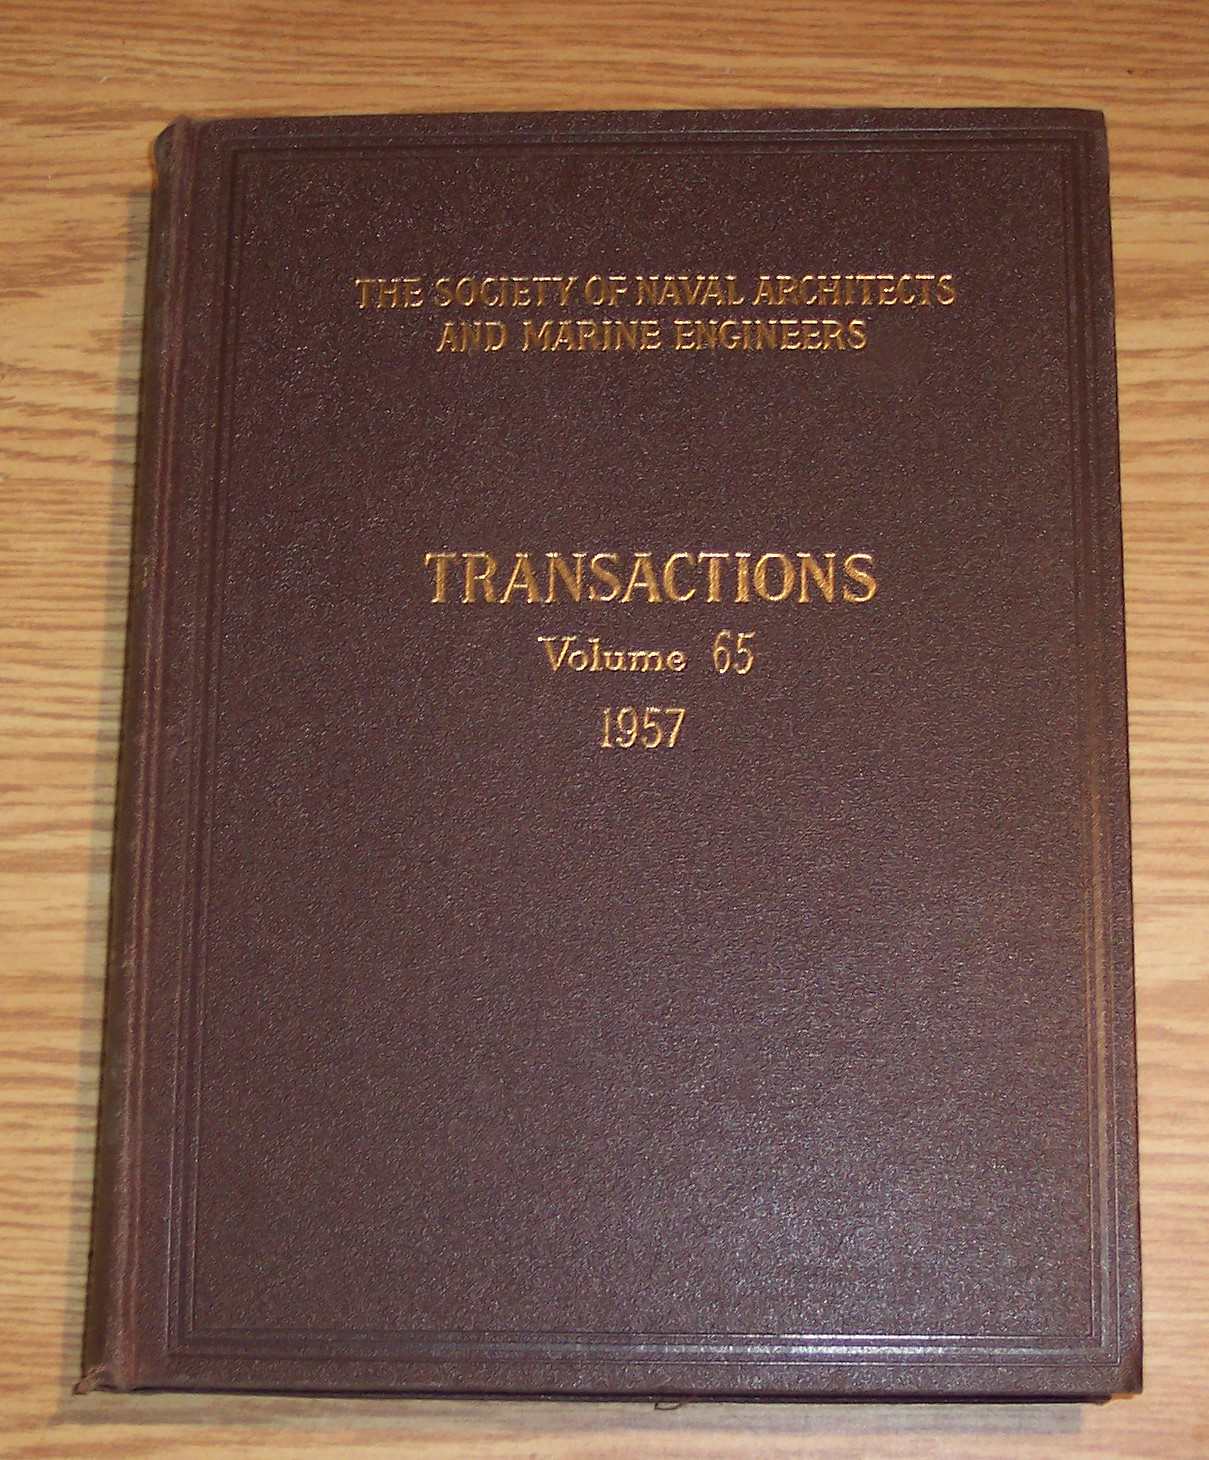 Image for The Society of Naval Architects and Marine Engineers Transactions Volume 65 1957